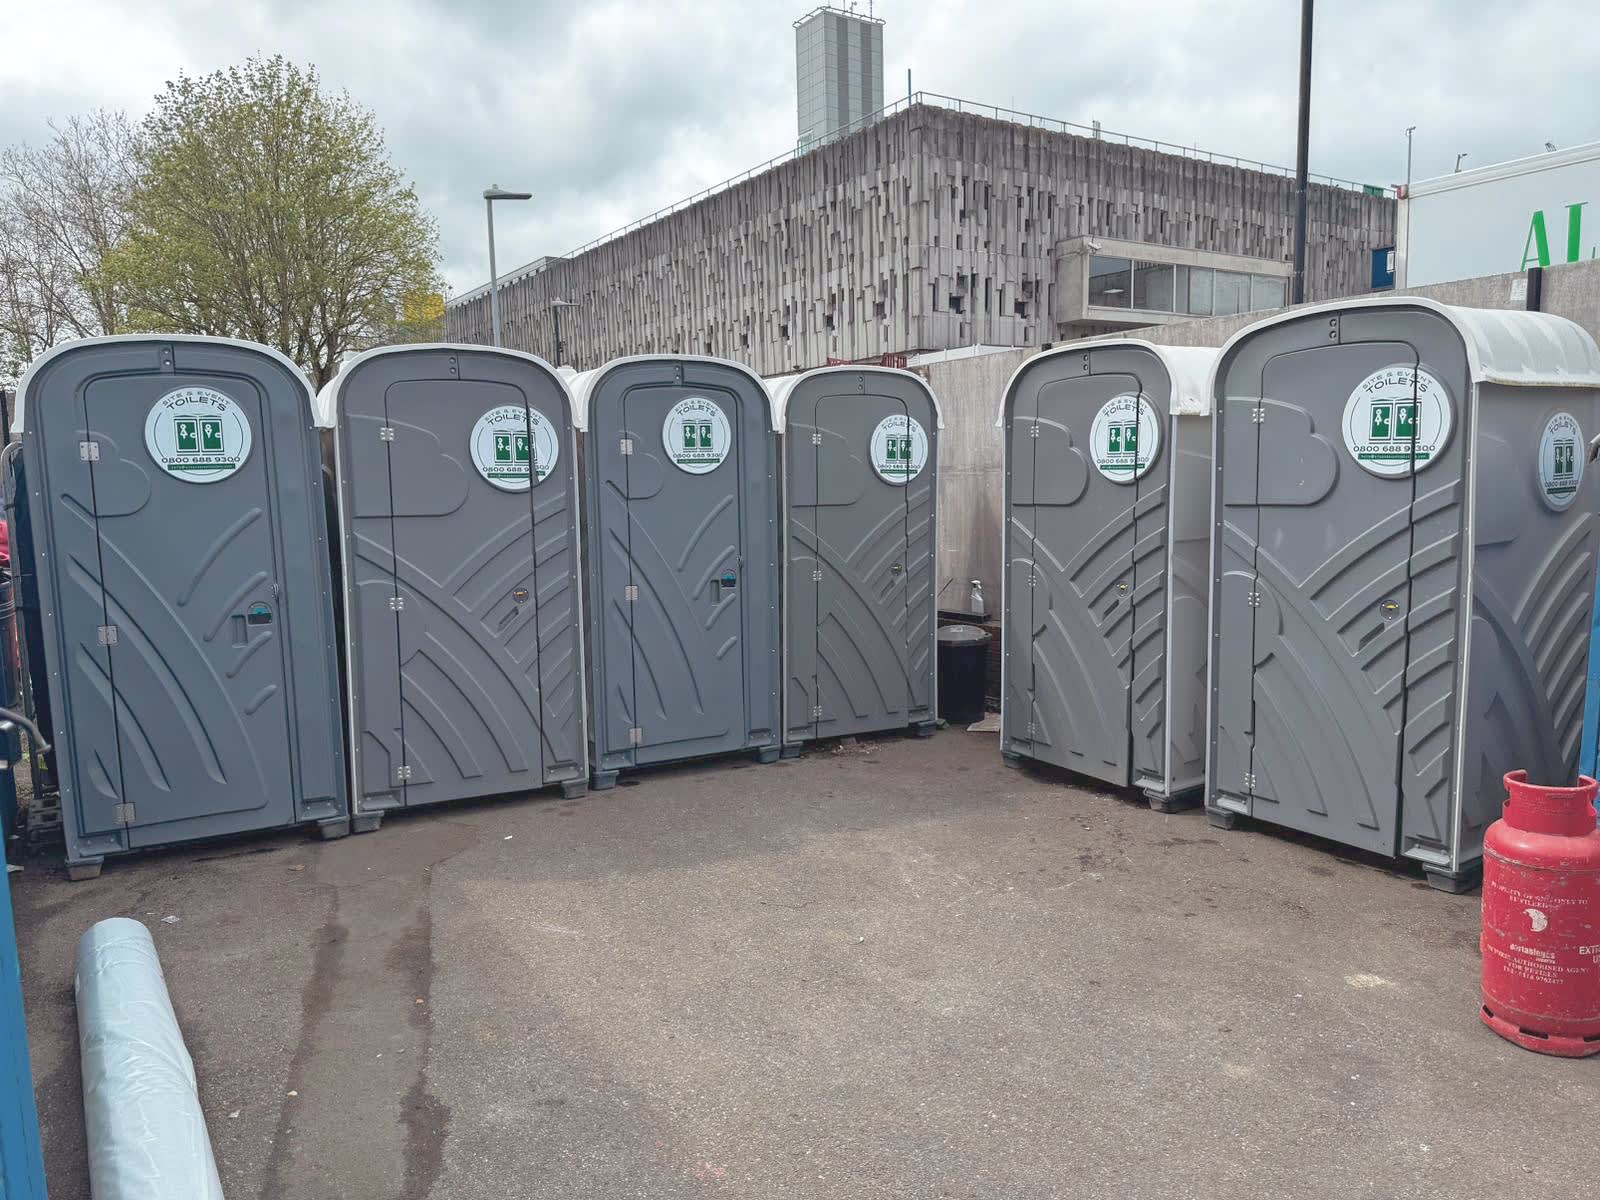 Images Site and Event Toilets Ltd